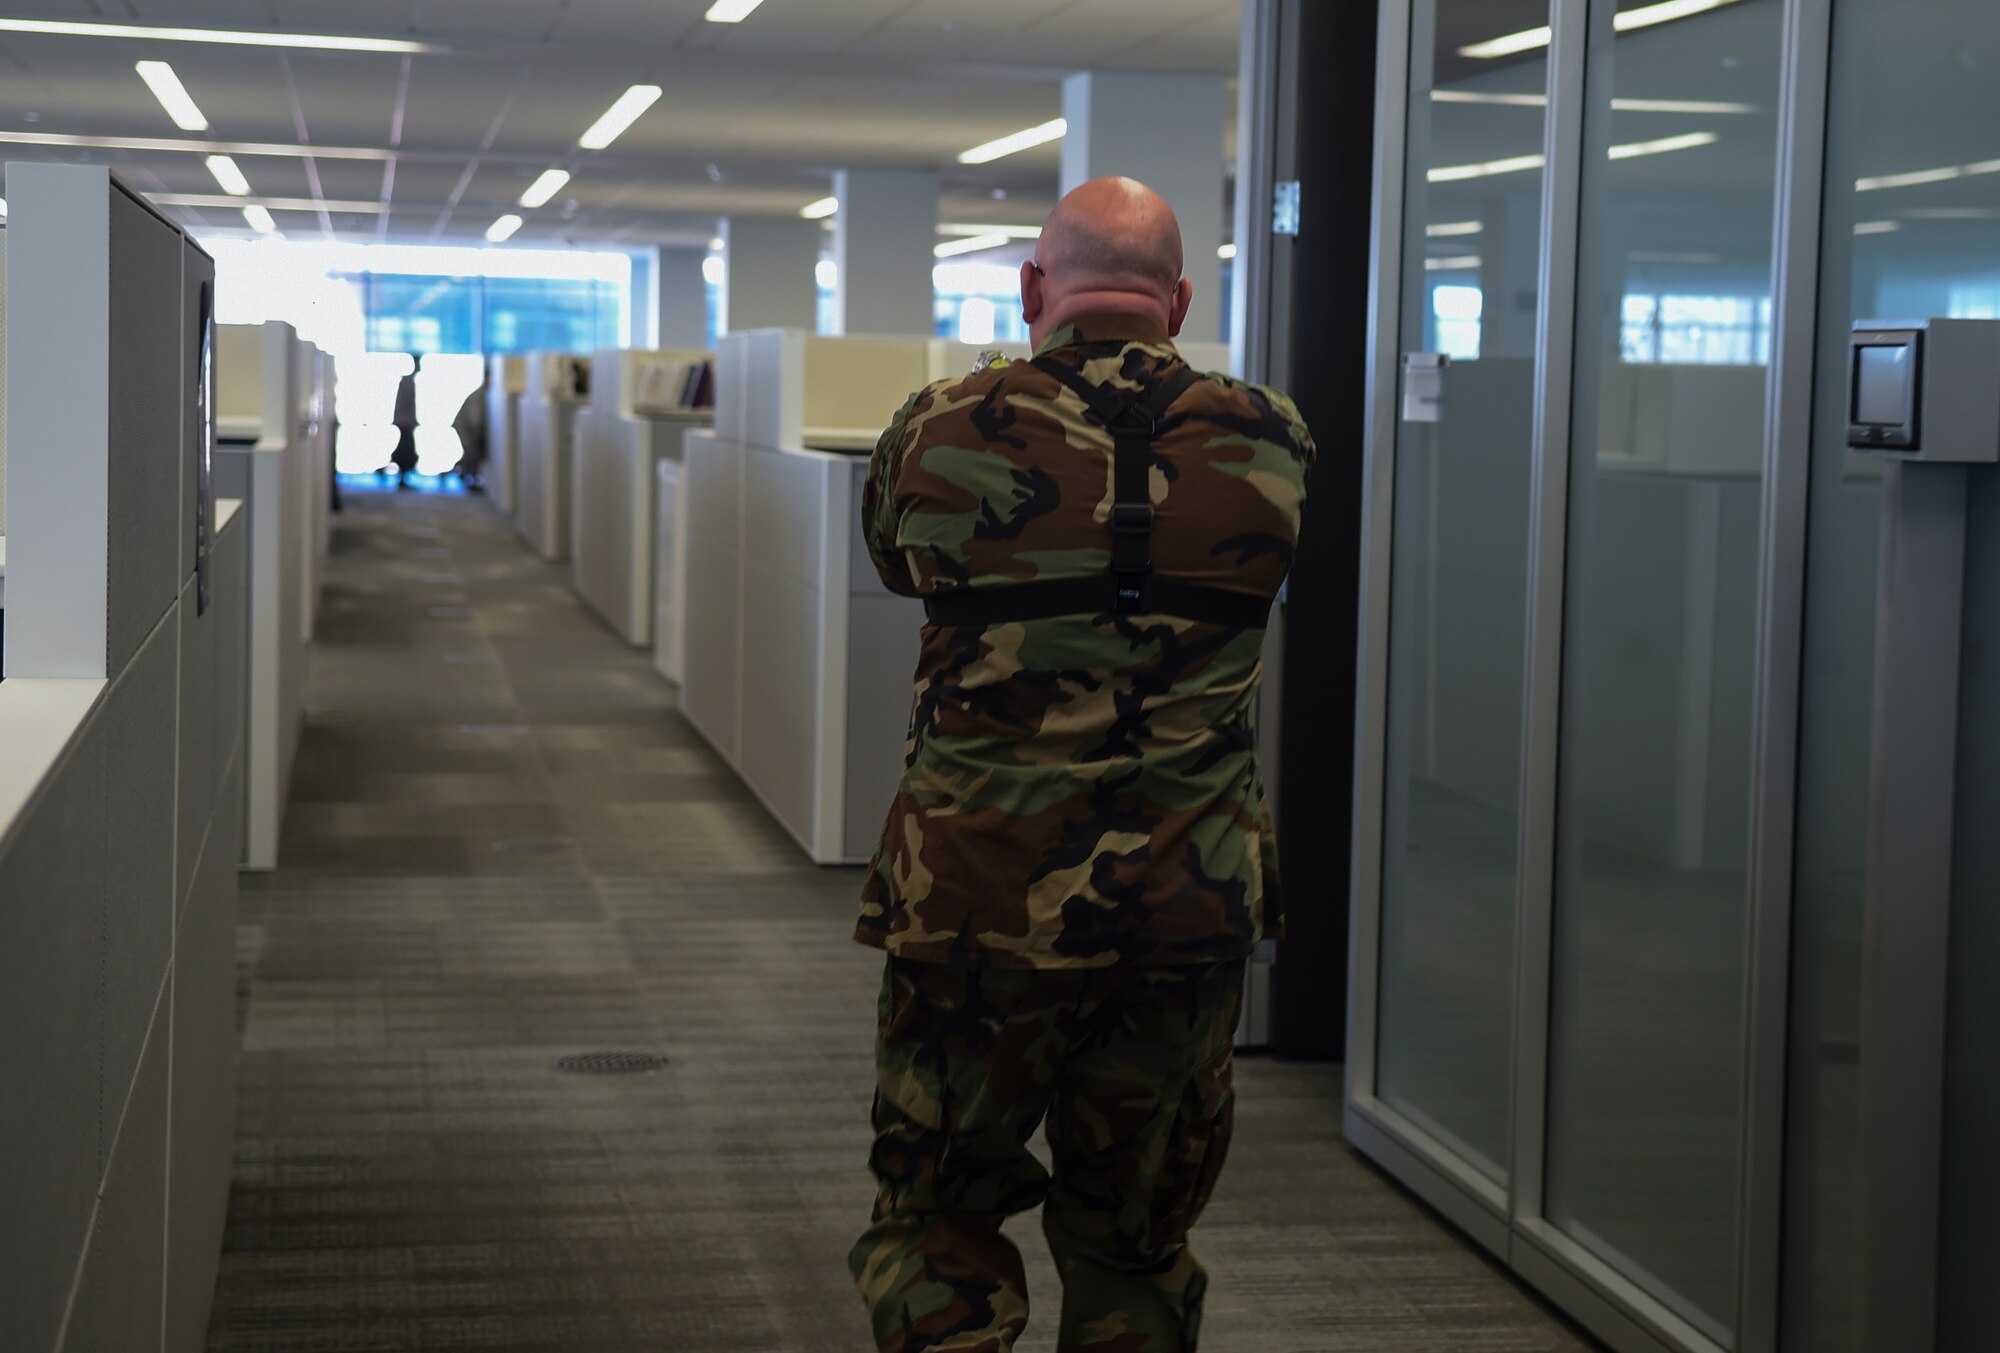 Senior Master Sgt. Guy Yesse, Air National Guard Inspector General's Office air inspections division superintendent, simulates an active shooter during an exercise on Joint Base Andrews, Md., March 9, 2016. Exercise programs utilize dynamic interactive scenarios to evaluate proficiency in individual and team responses.  (U.S. Air Force photo by Senior Airman Mariah Haddenham/Released)